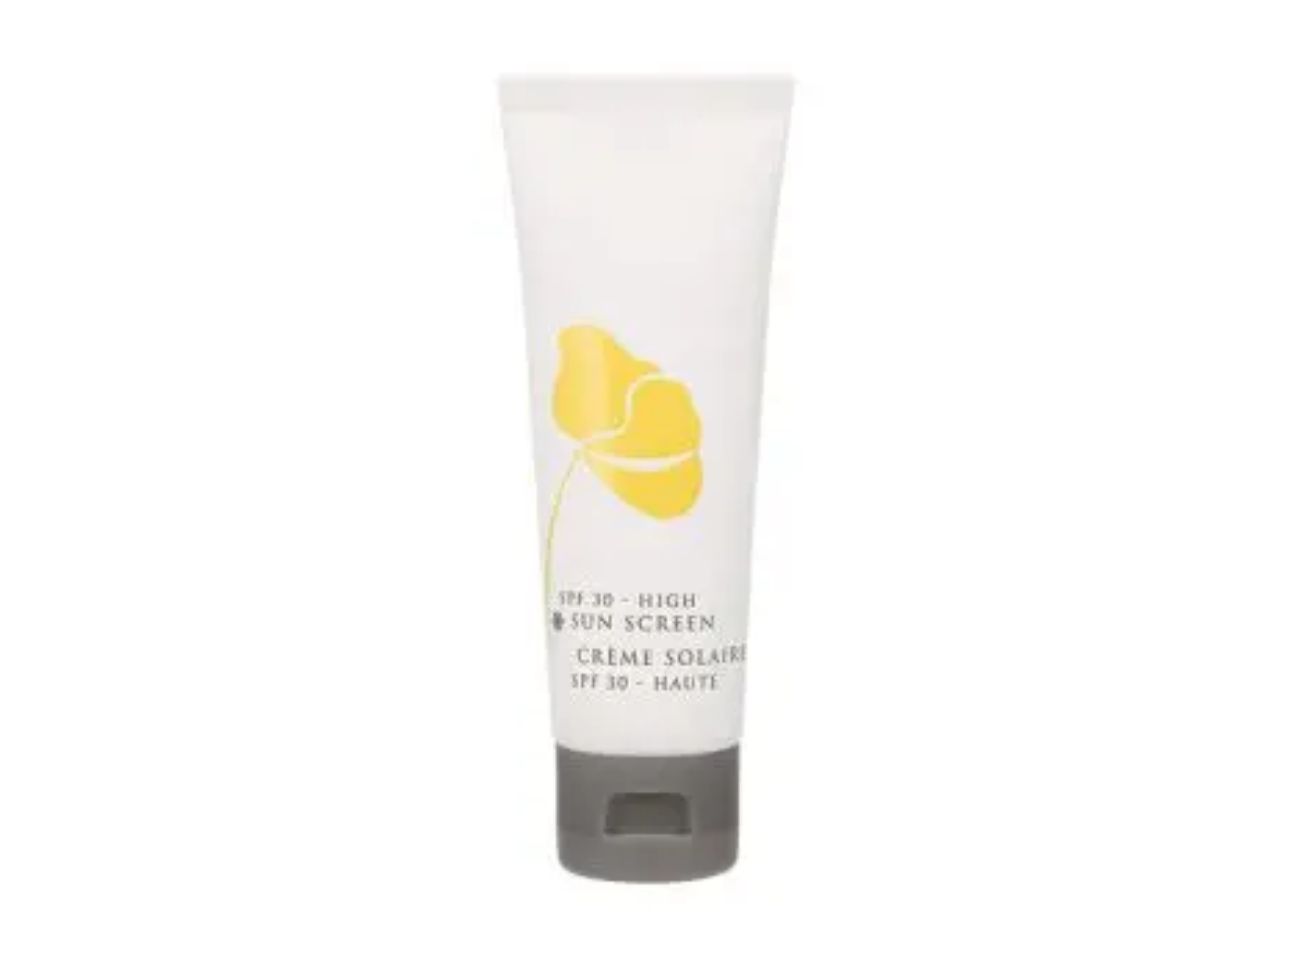 Cocooning Accessoires - Milde Sonnencreme mit LSF 30 in Tube, 50 ml